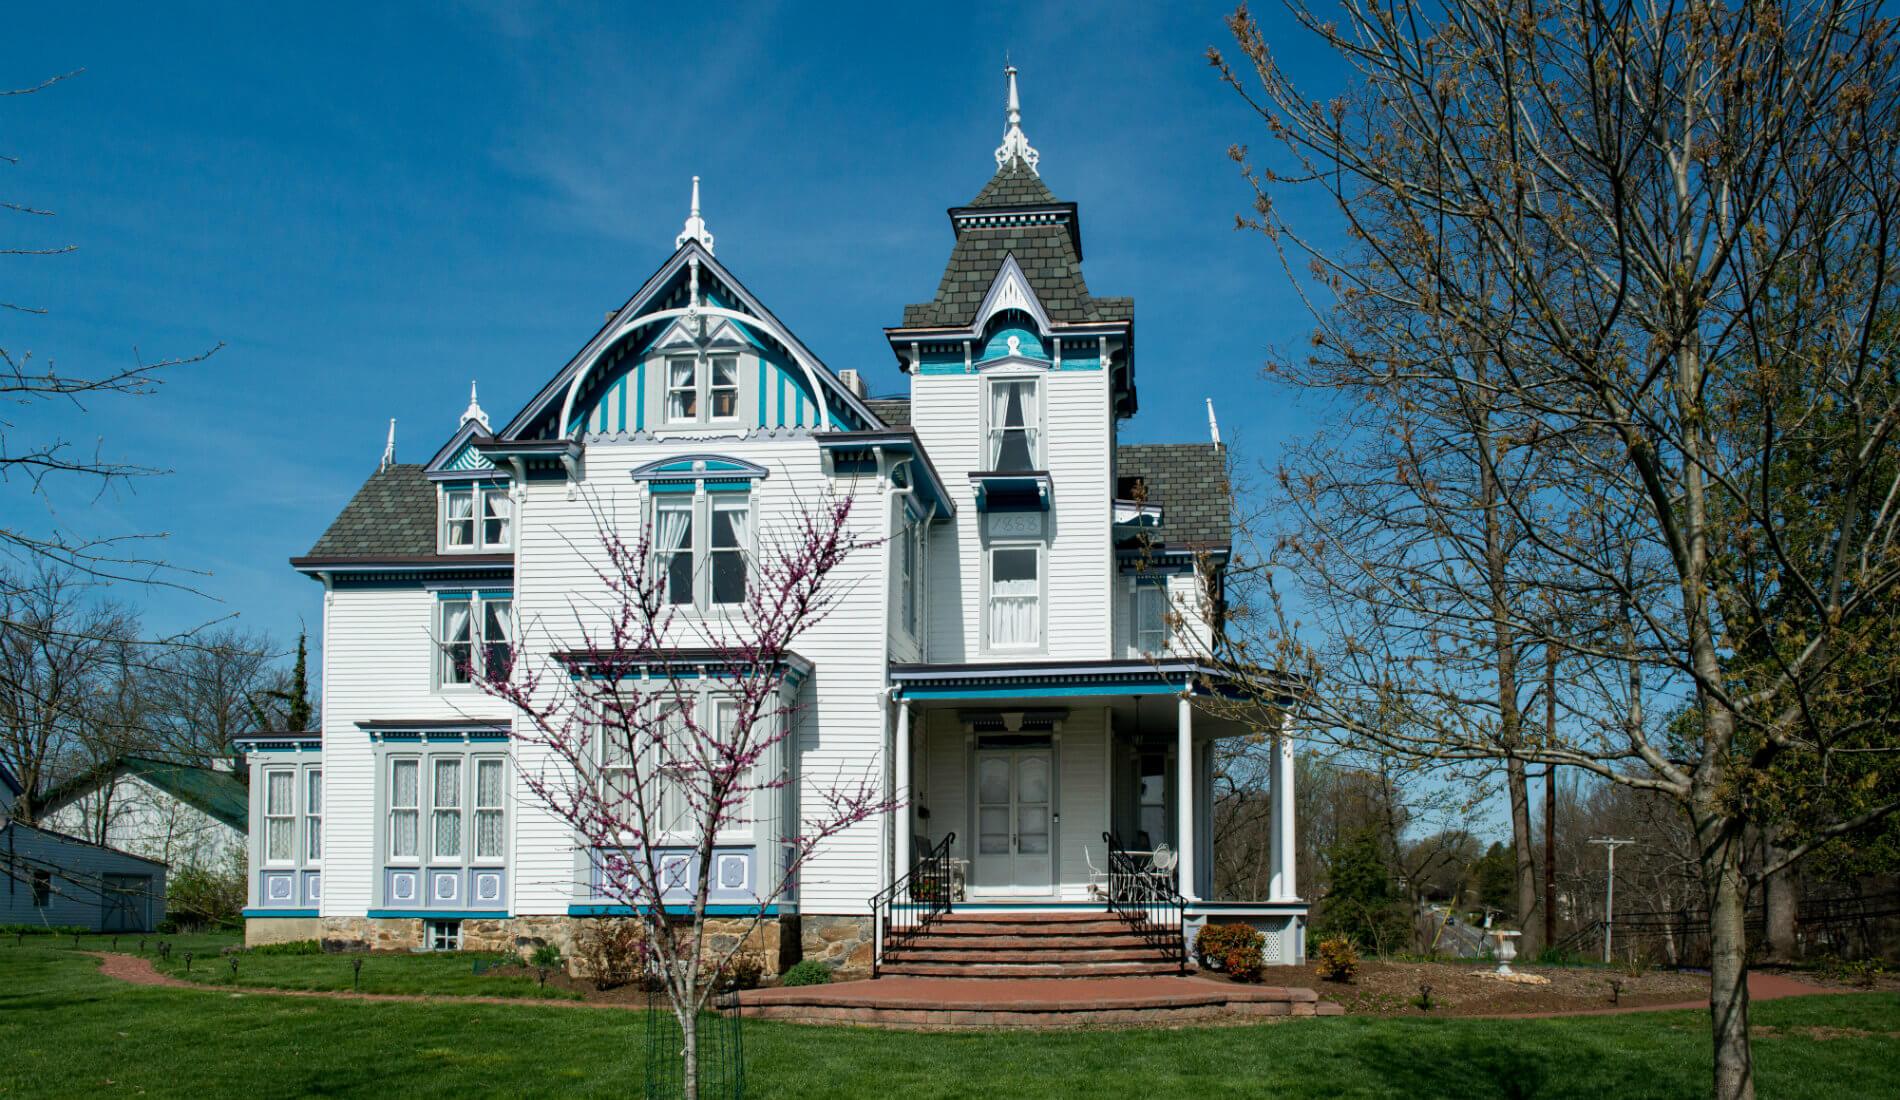 Large white Victorian styled house with blue and grey detailing and black shingles